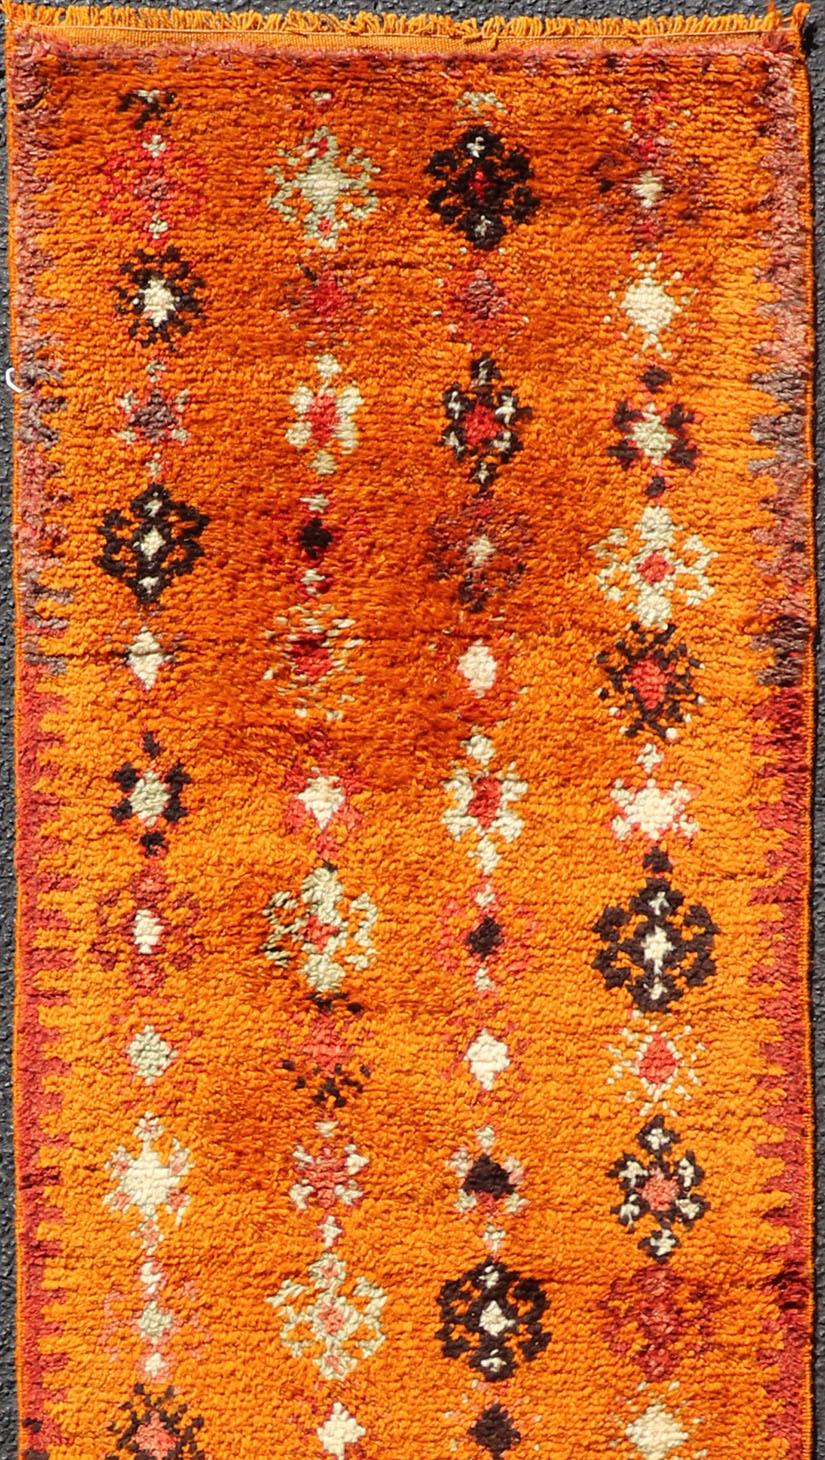 Tribal Vintage Moroccan Runner with Sub-Geometric Motifs in Saffron, Gold and Orange